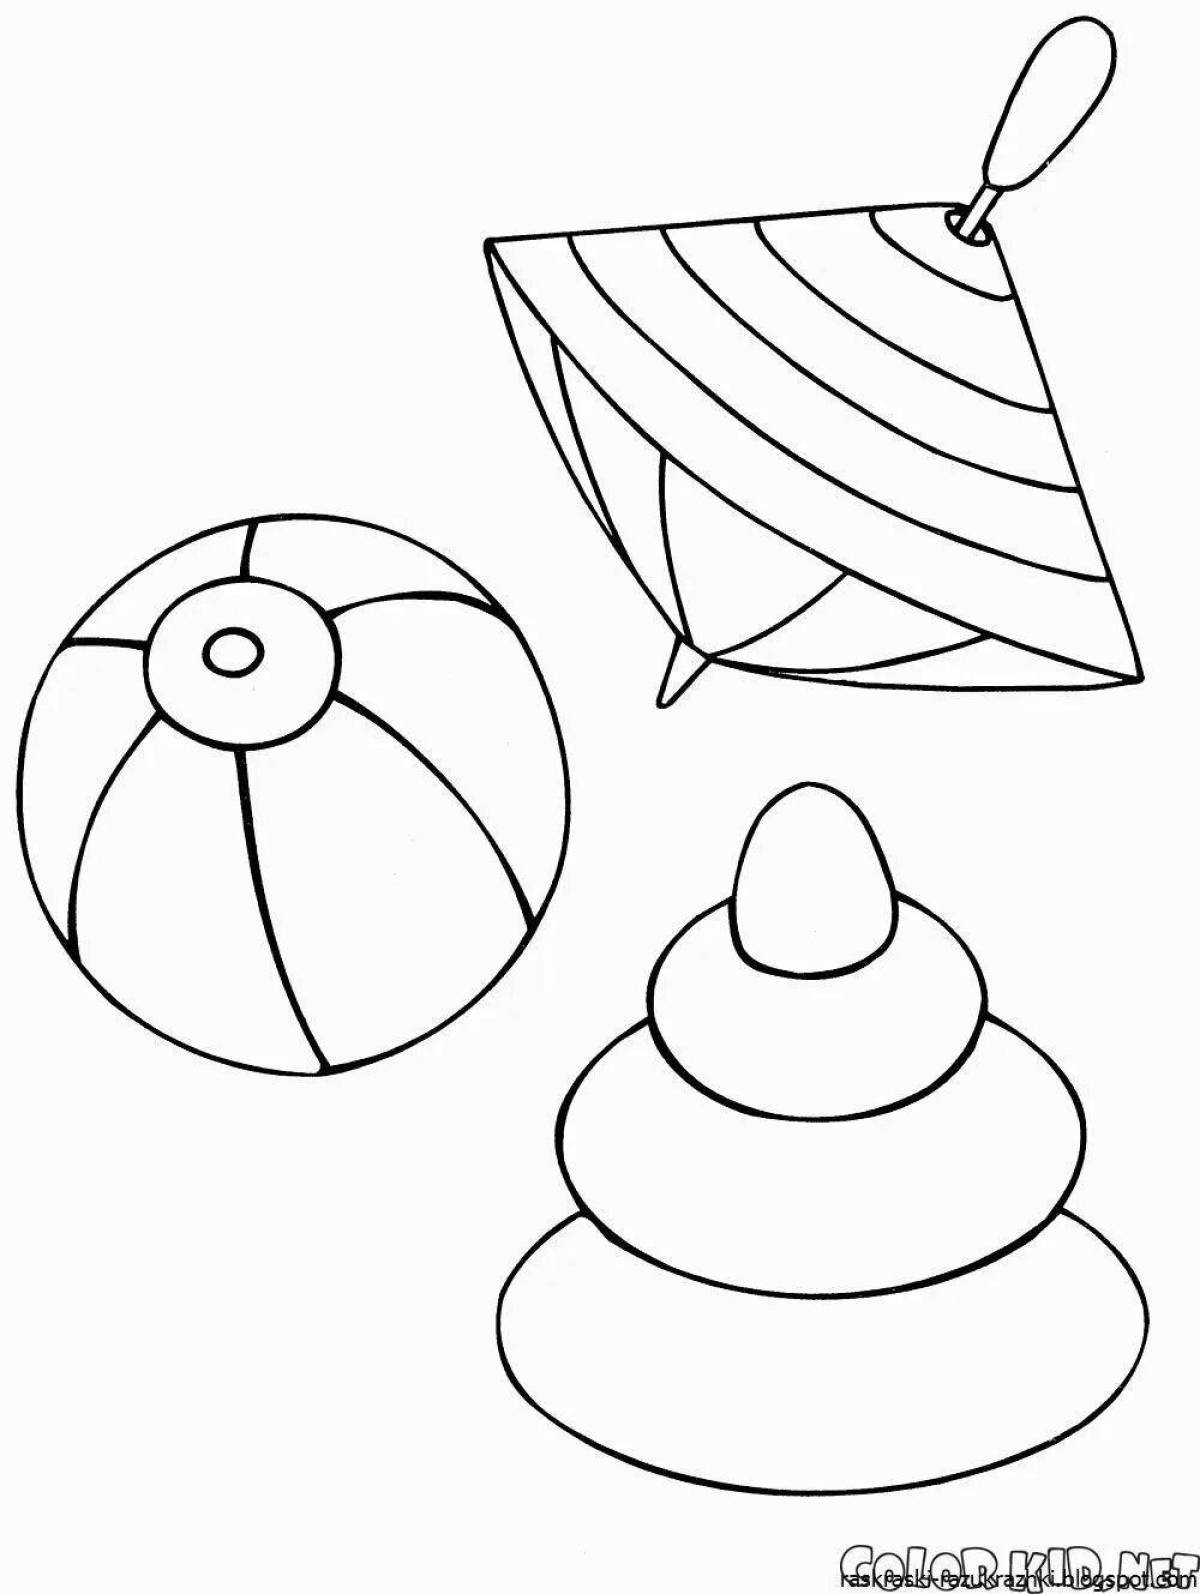 Stunning spinning top coloring book for kids